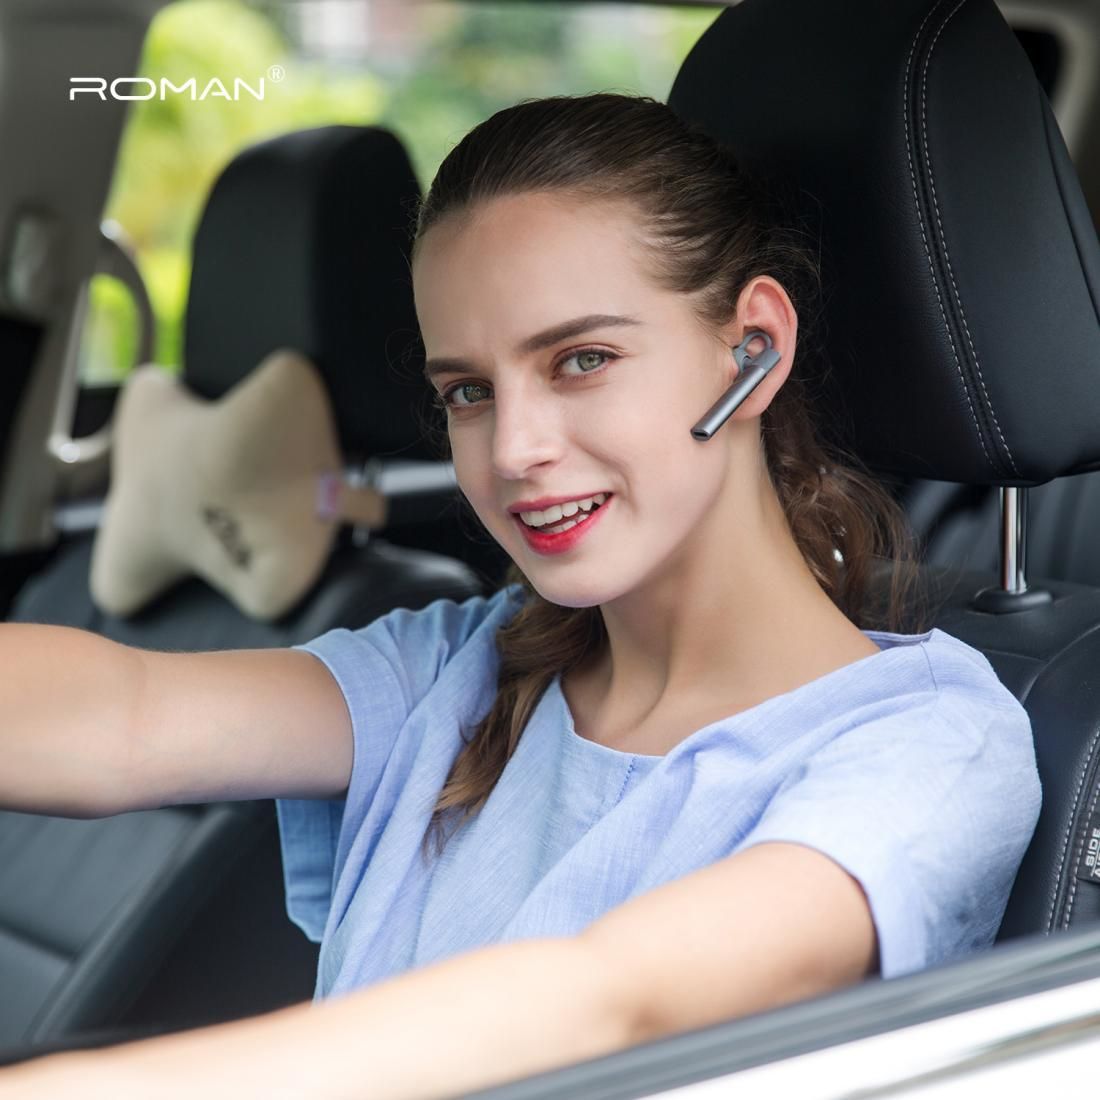 Is it Illegal to Wear Headphones While Driving?